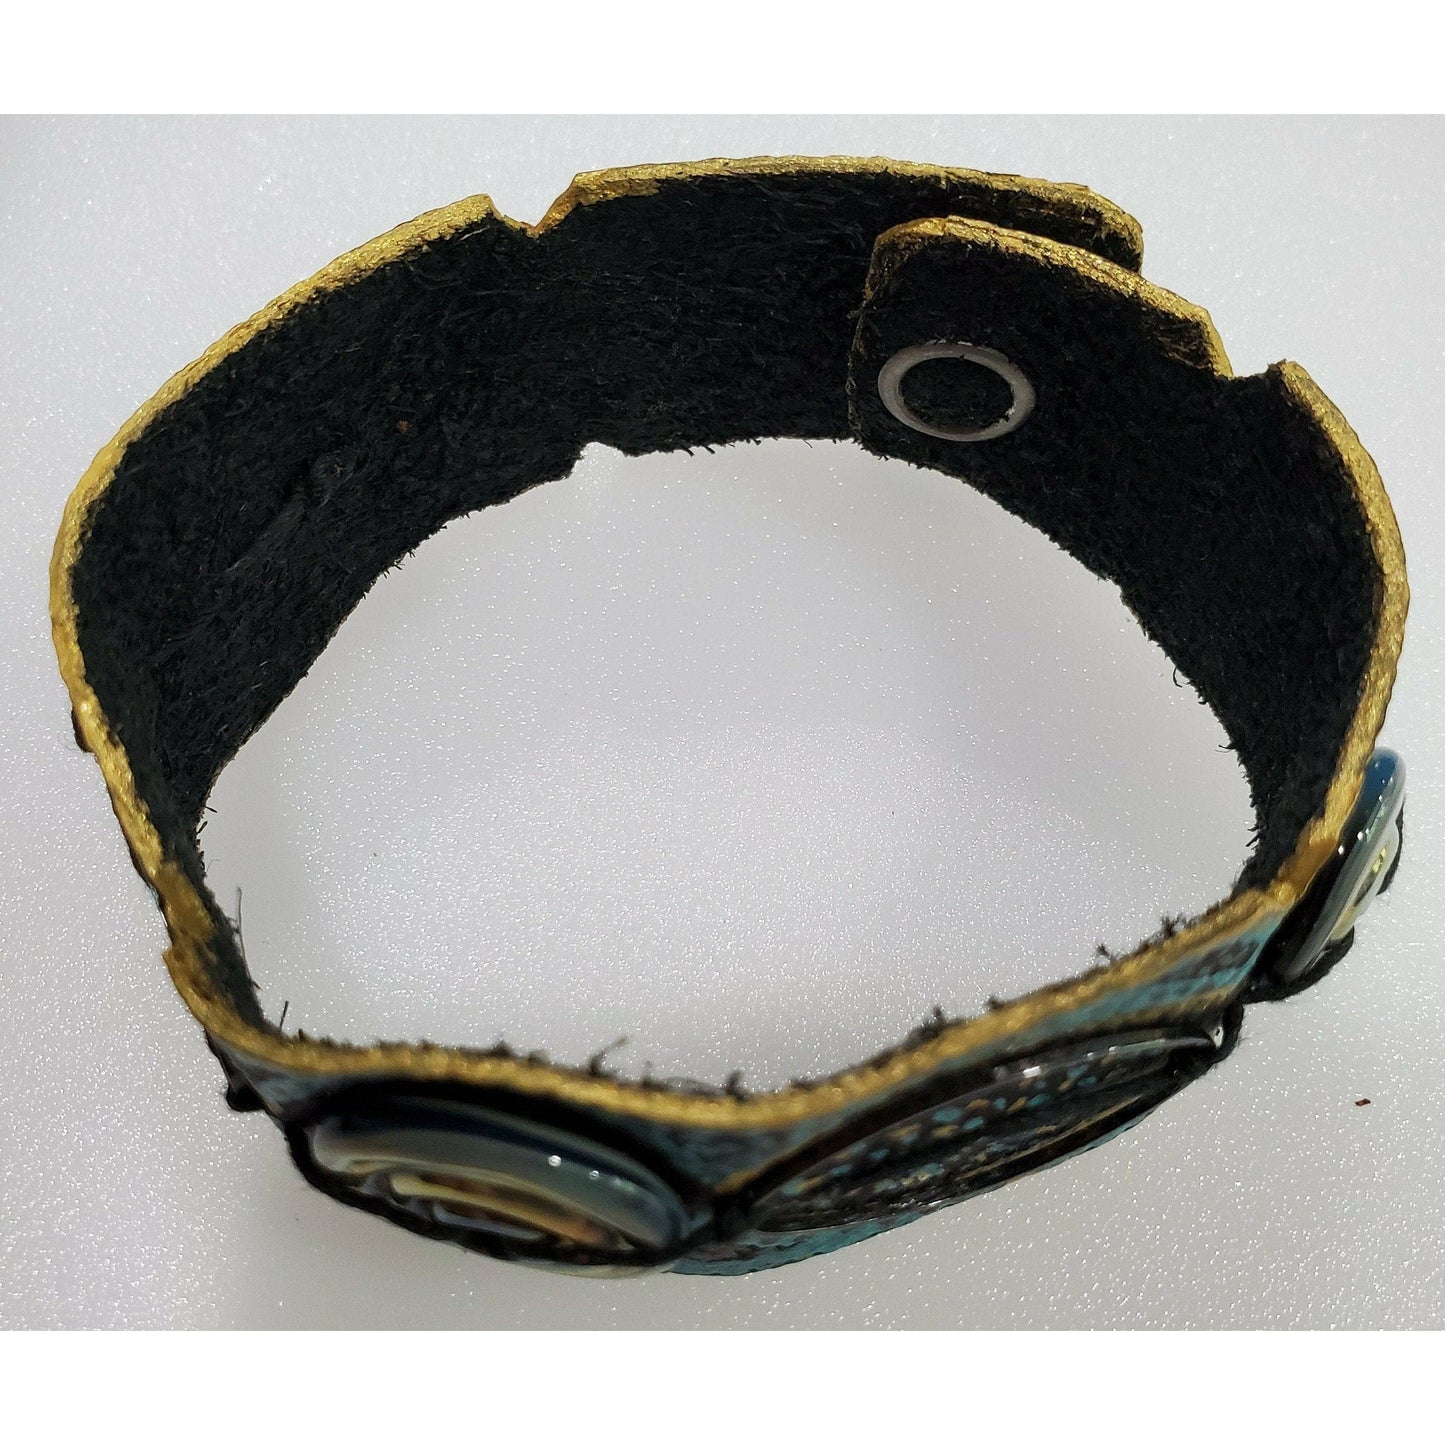 Teal and Gold Hand Painted Leather Bracelet